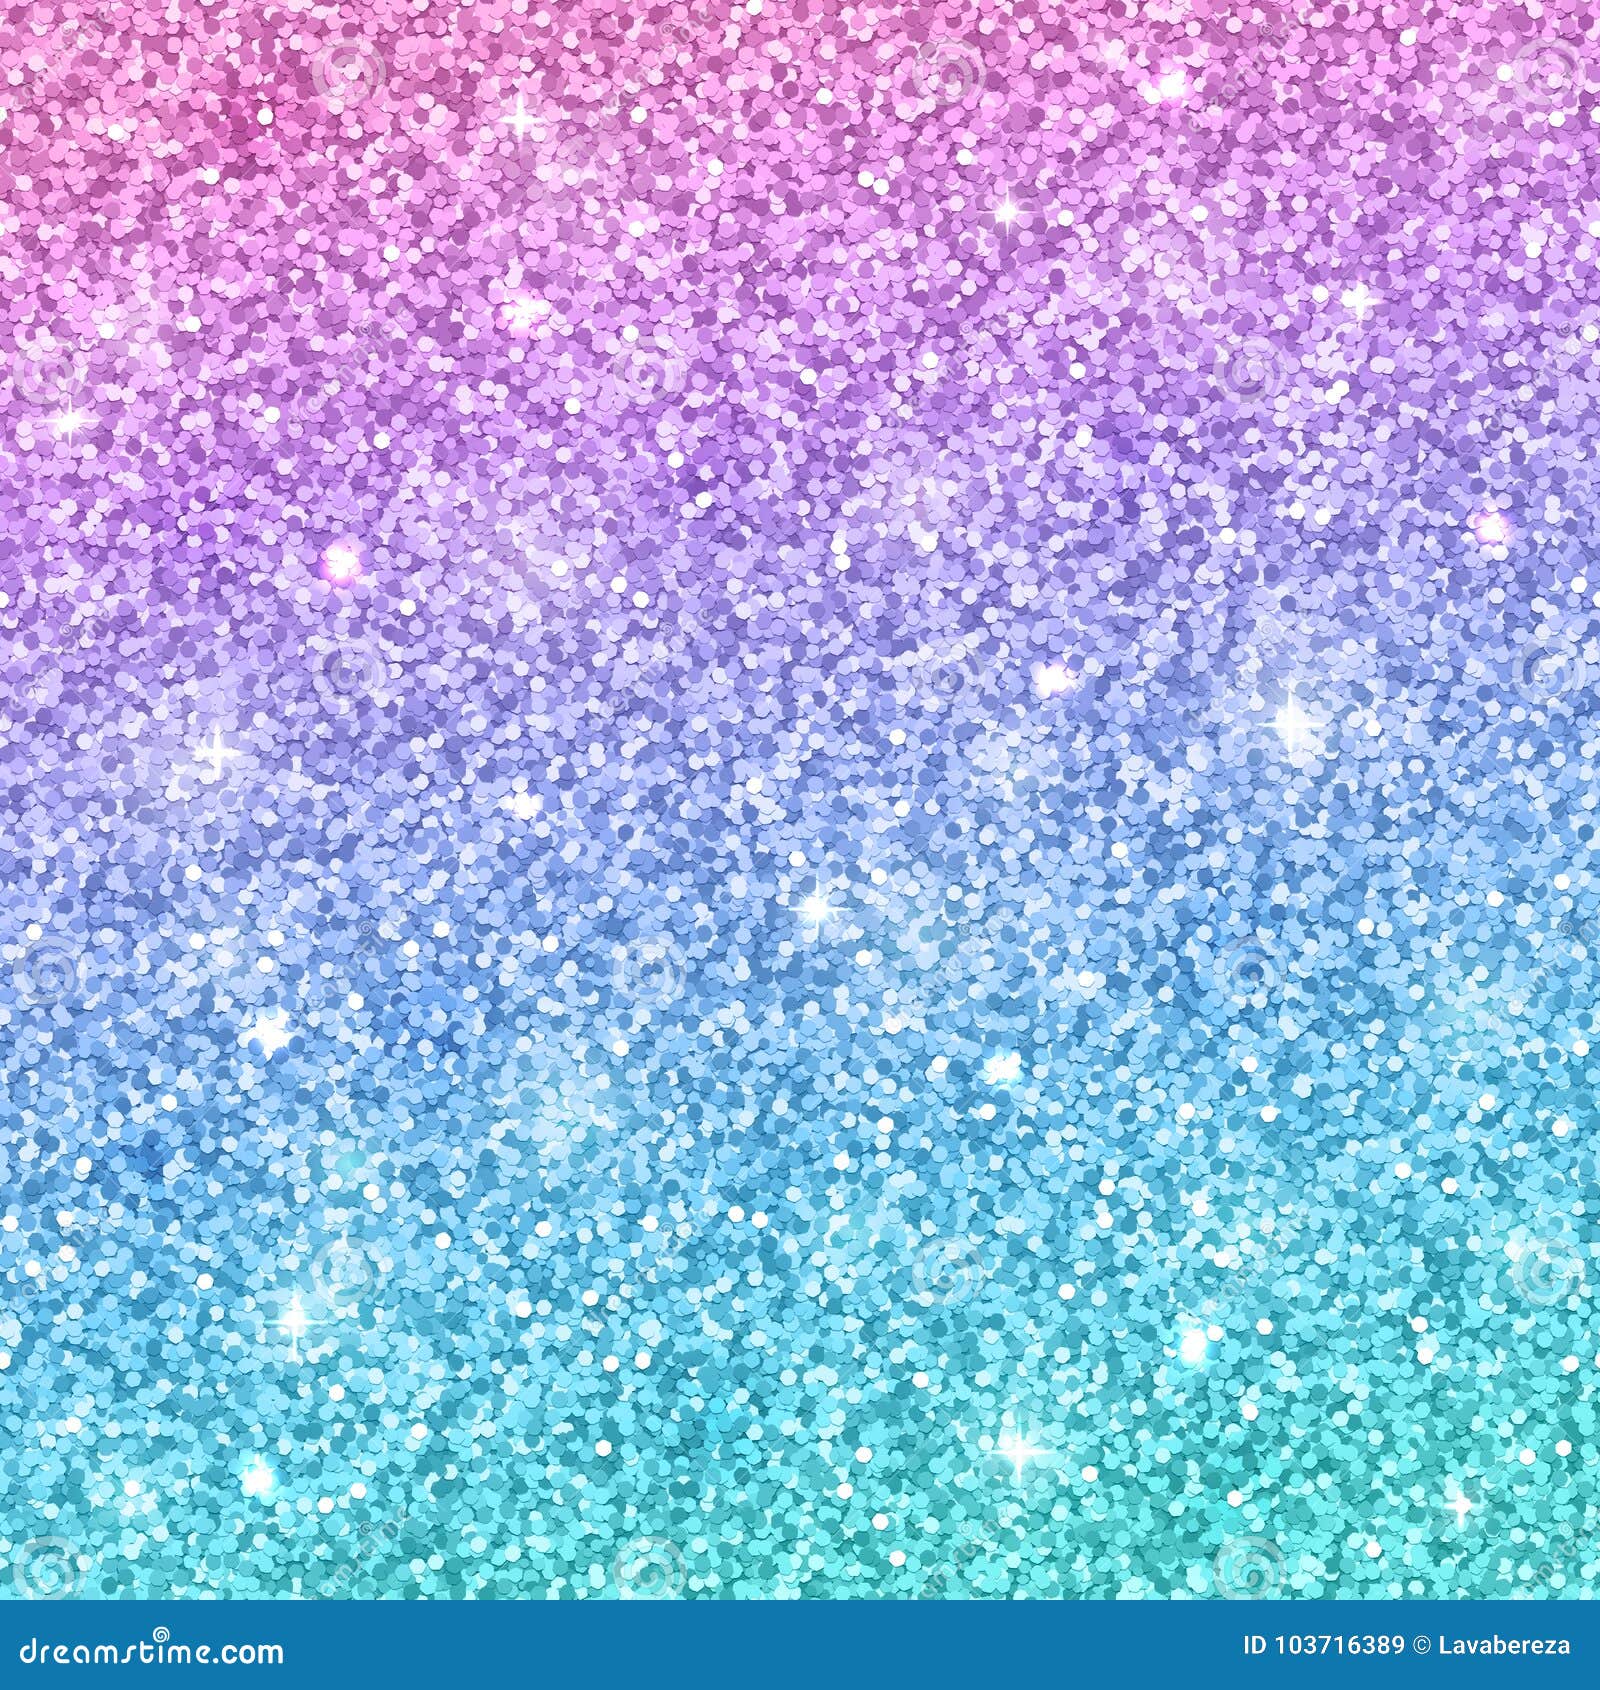 Pink Blue Glitter Background. Vector Stock Vector ...
 Pink And Blue Sparkle Background